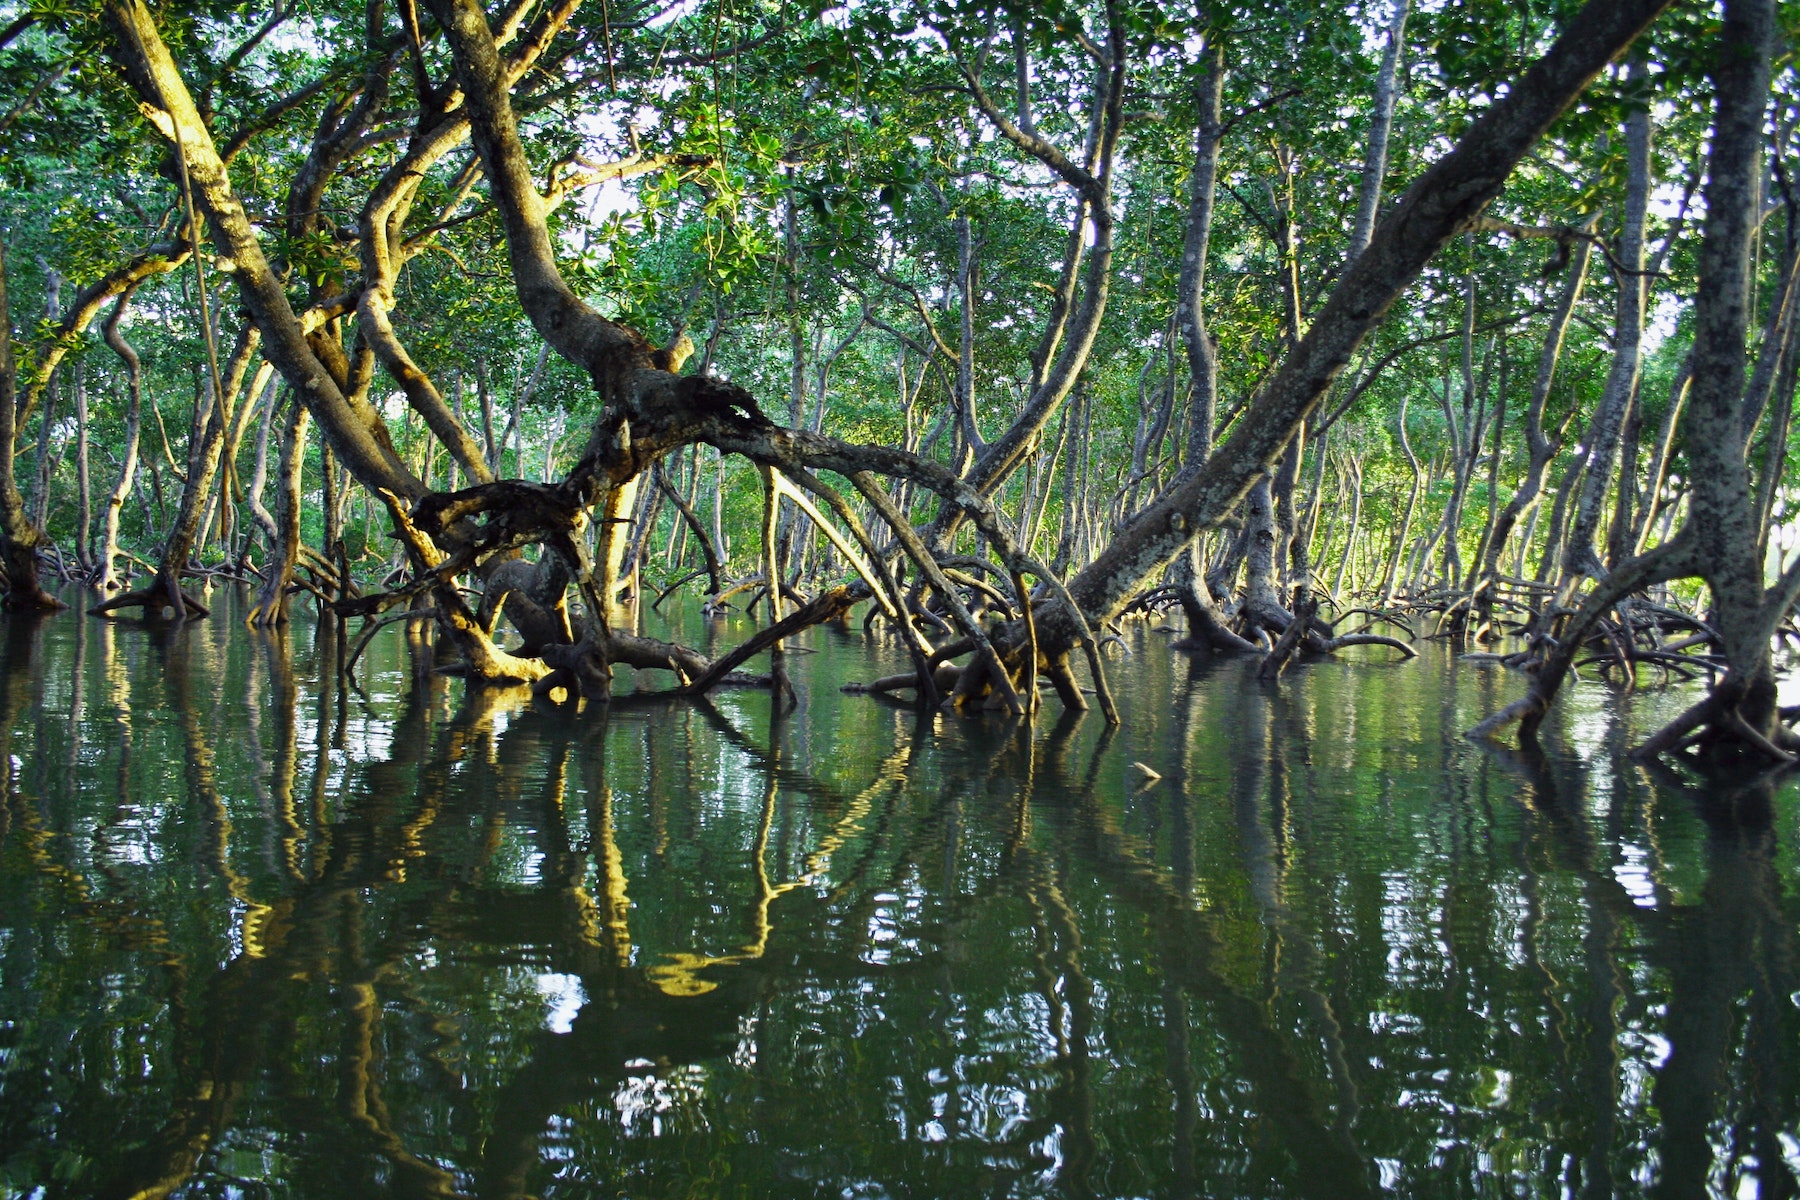 mangrove trees on flooded ground with a green canopy